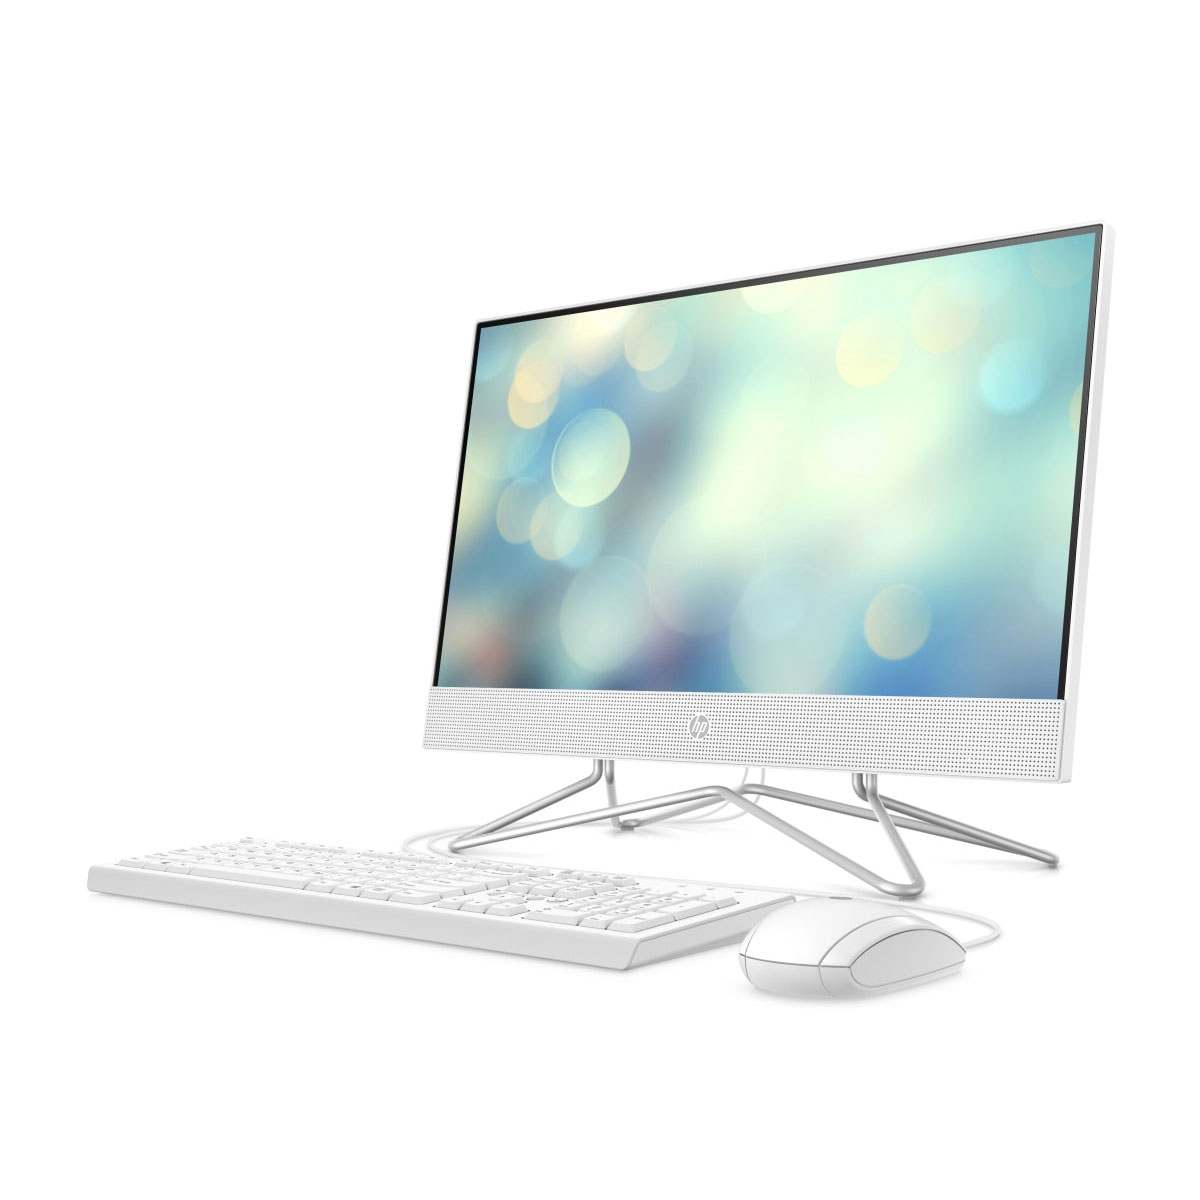 HP 205 G4 All-in-One